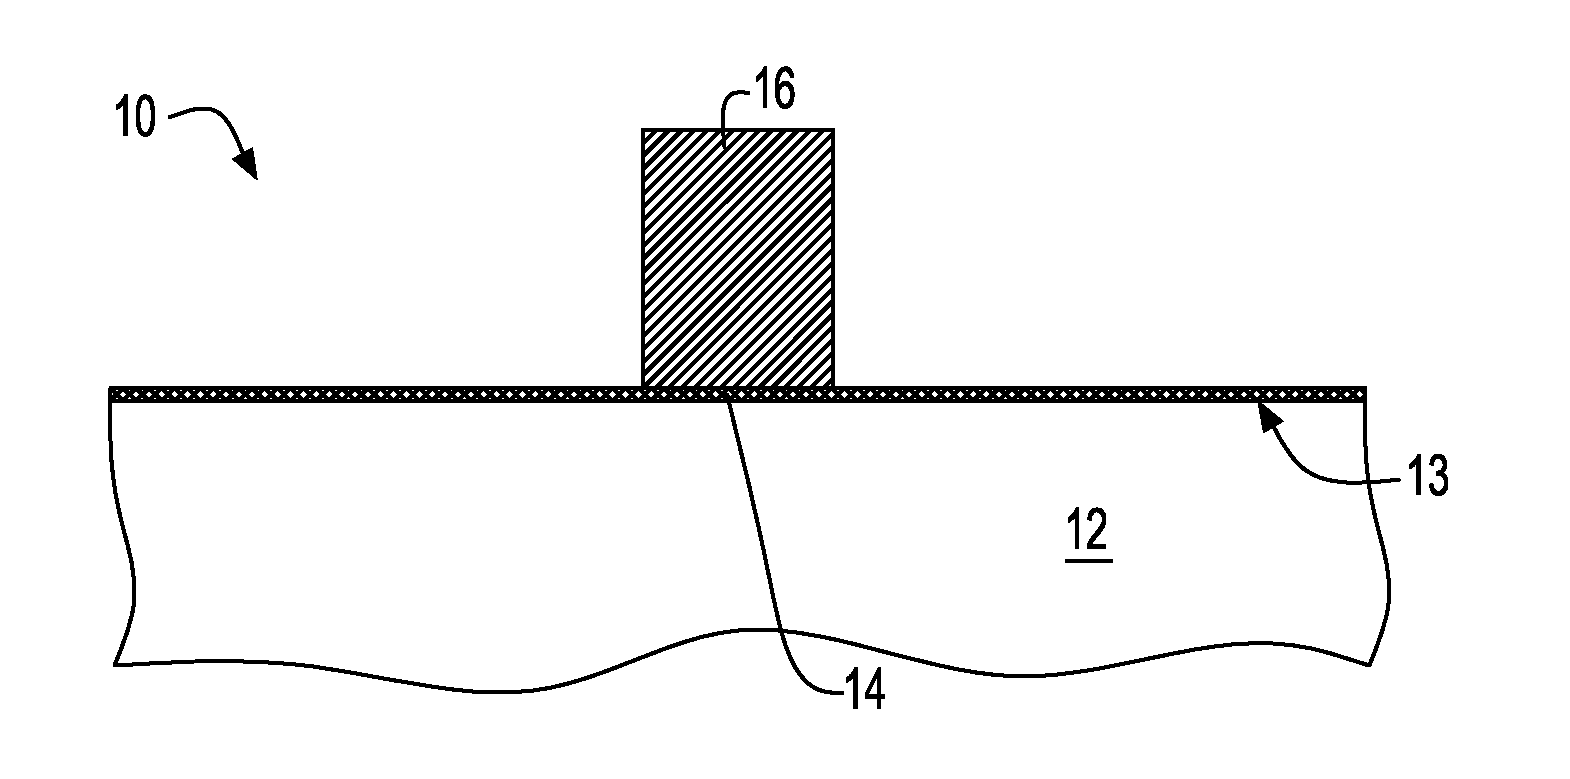 Semiconductor structures having improved contact resistance